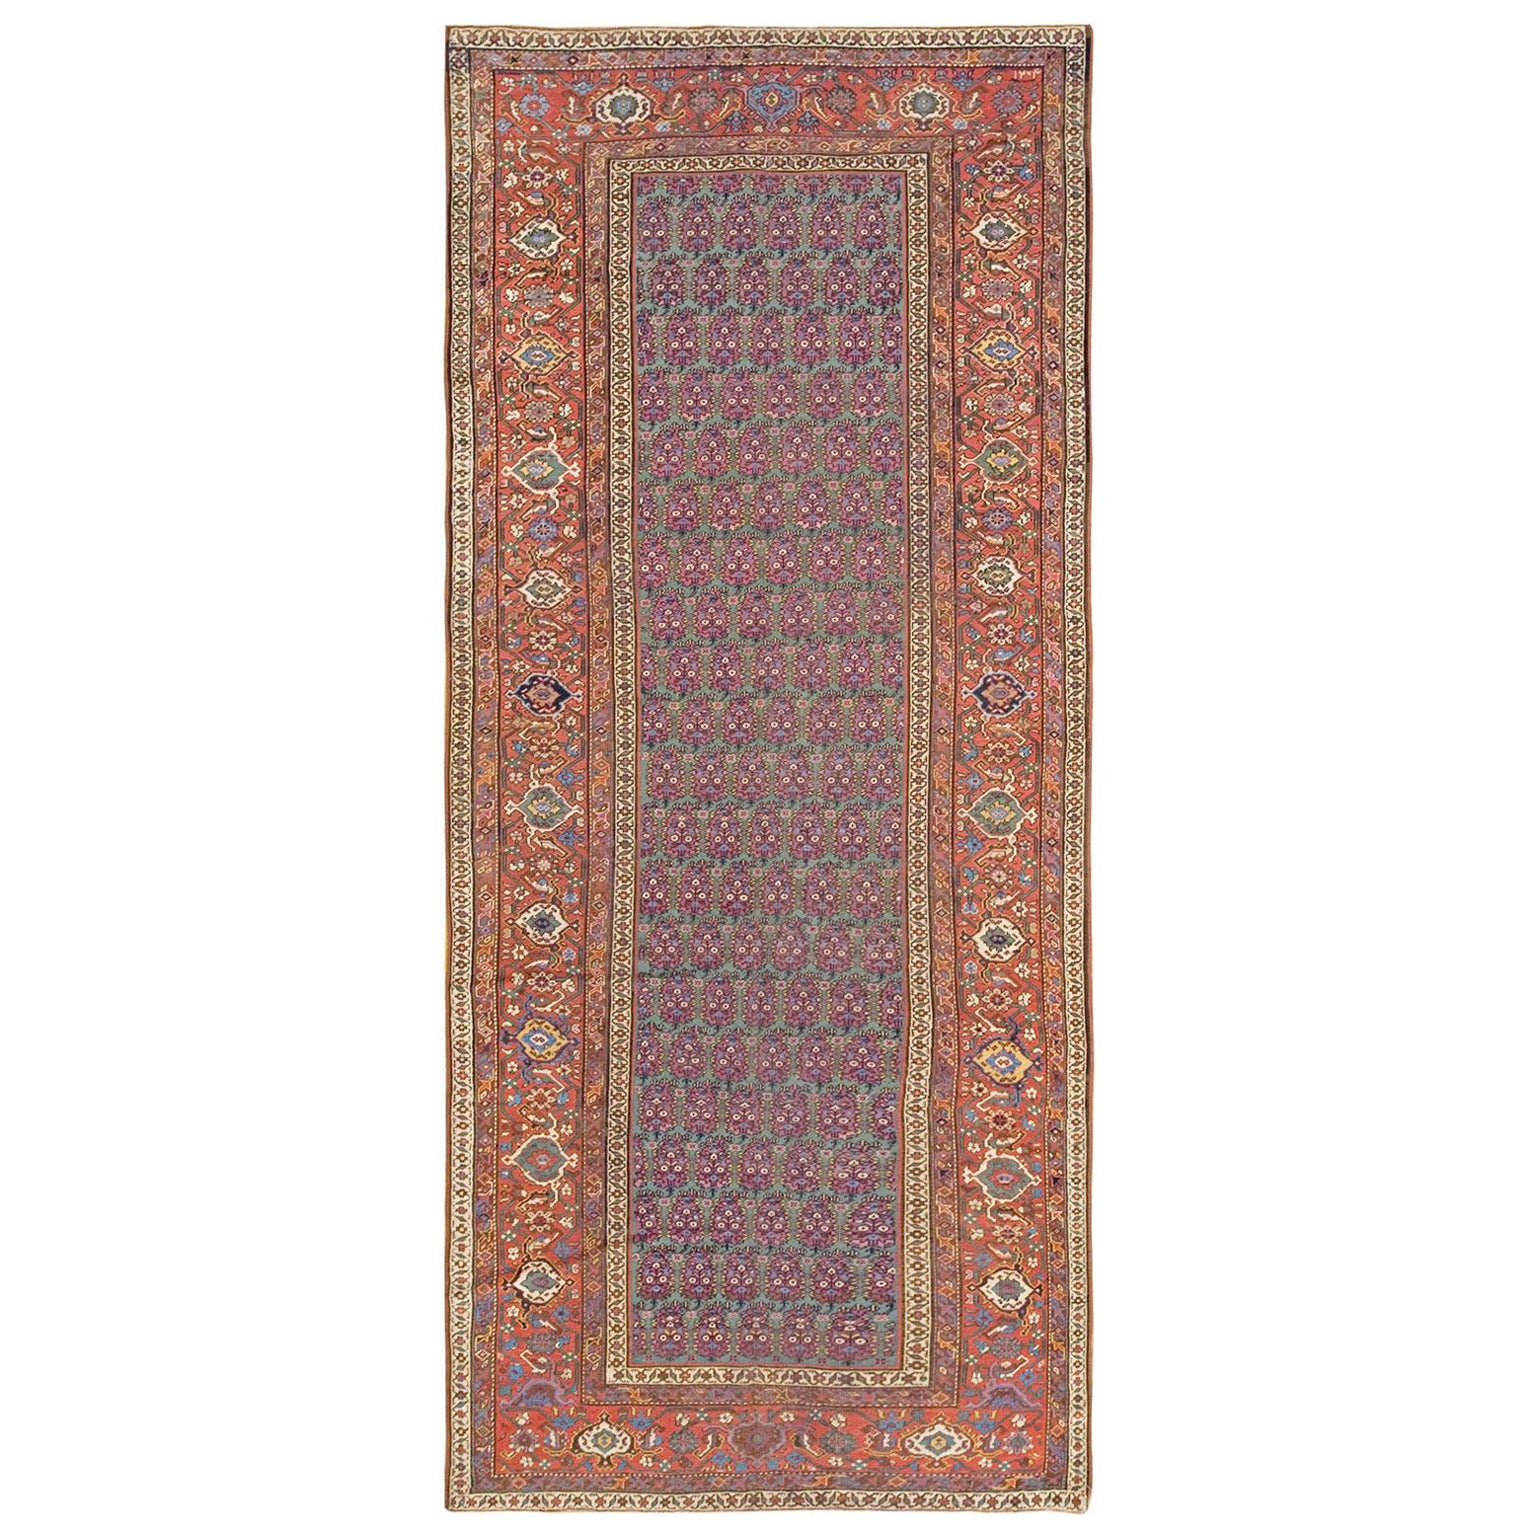 Late 19th Century N.W. Persian Carpet ( 4'8" x 11' - 143 x 335 ) For Sale